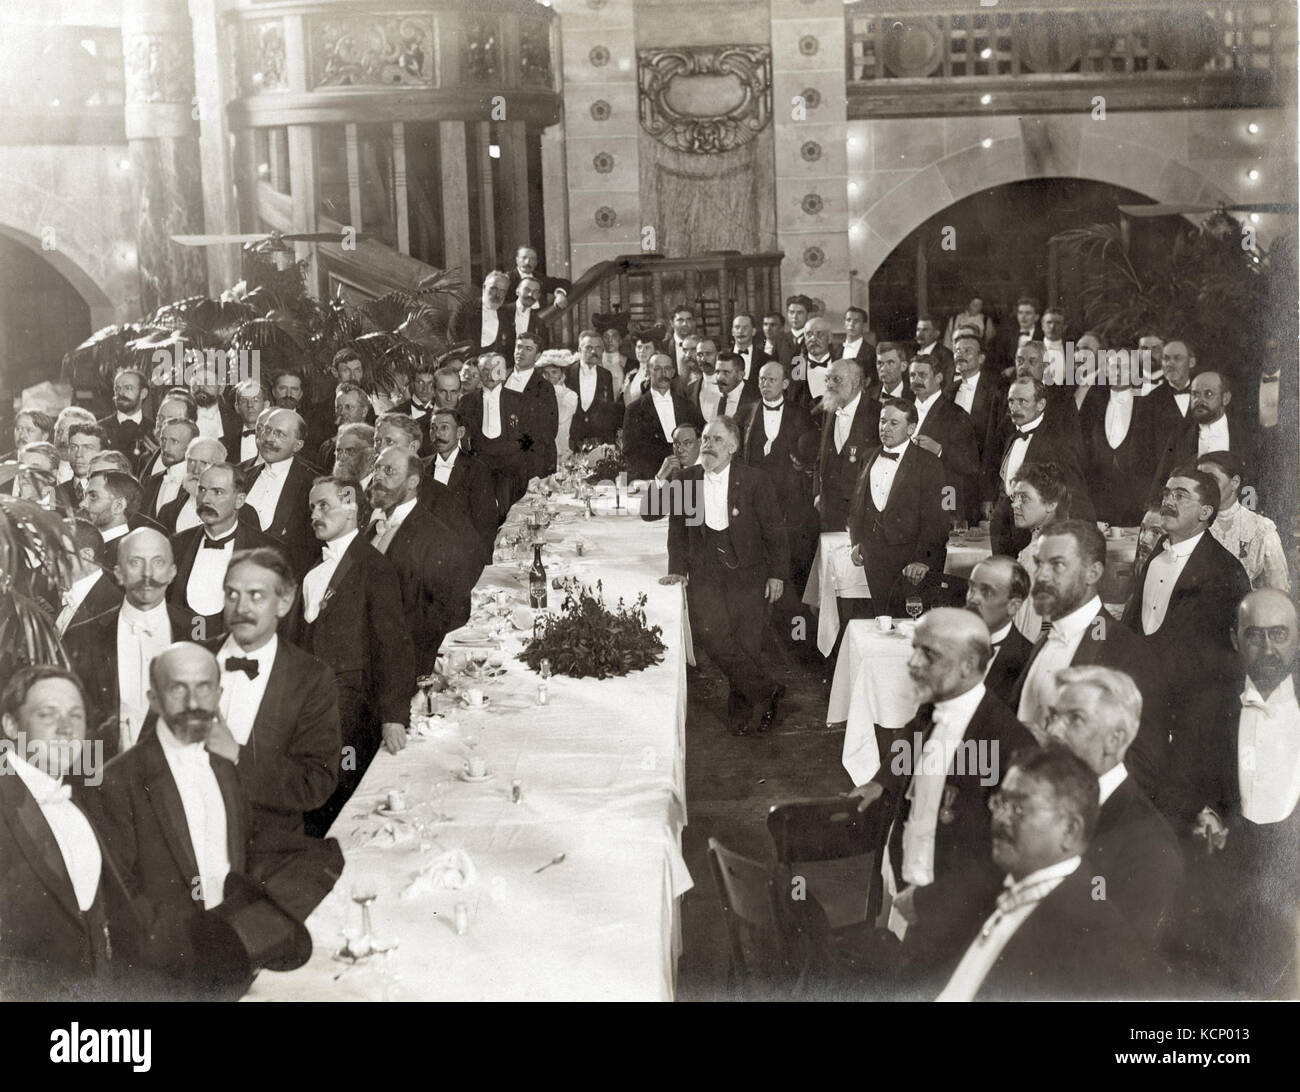 Banquet for scientists in the Tyrolean Alps at the 1904 World's Fair, 22 September 1904. (View of banqueters standing, most looking to the left) Stock Photo